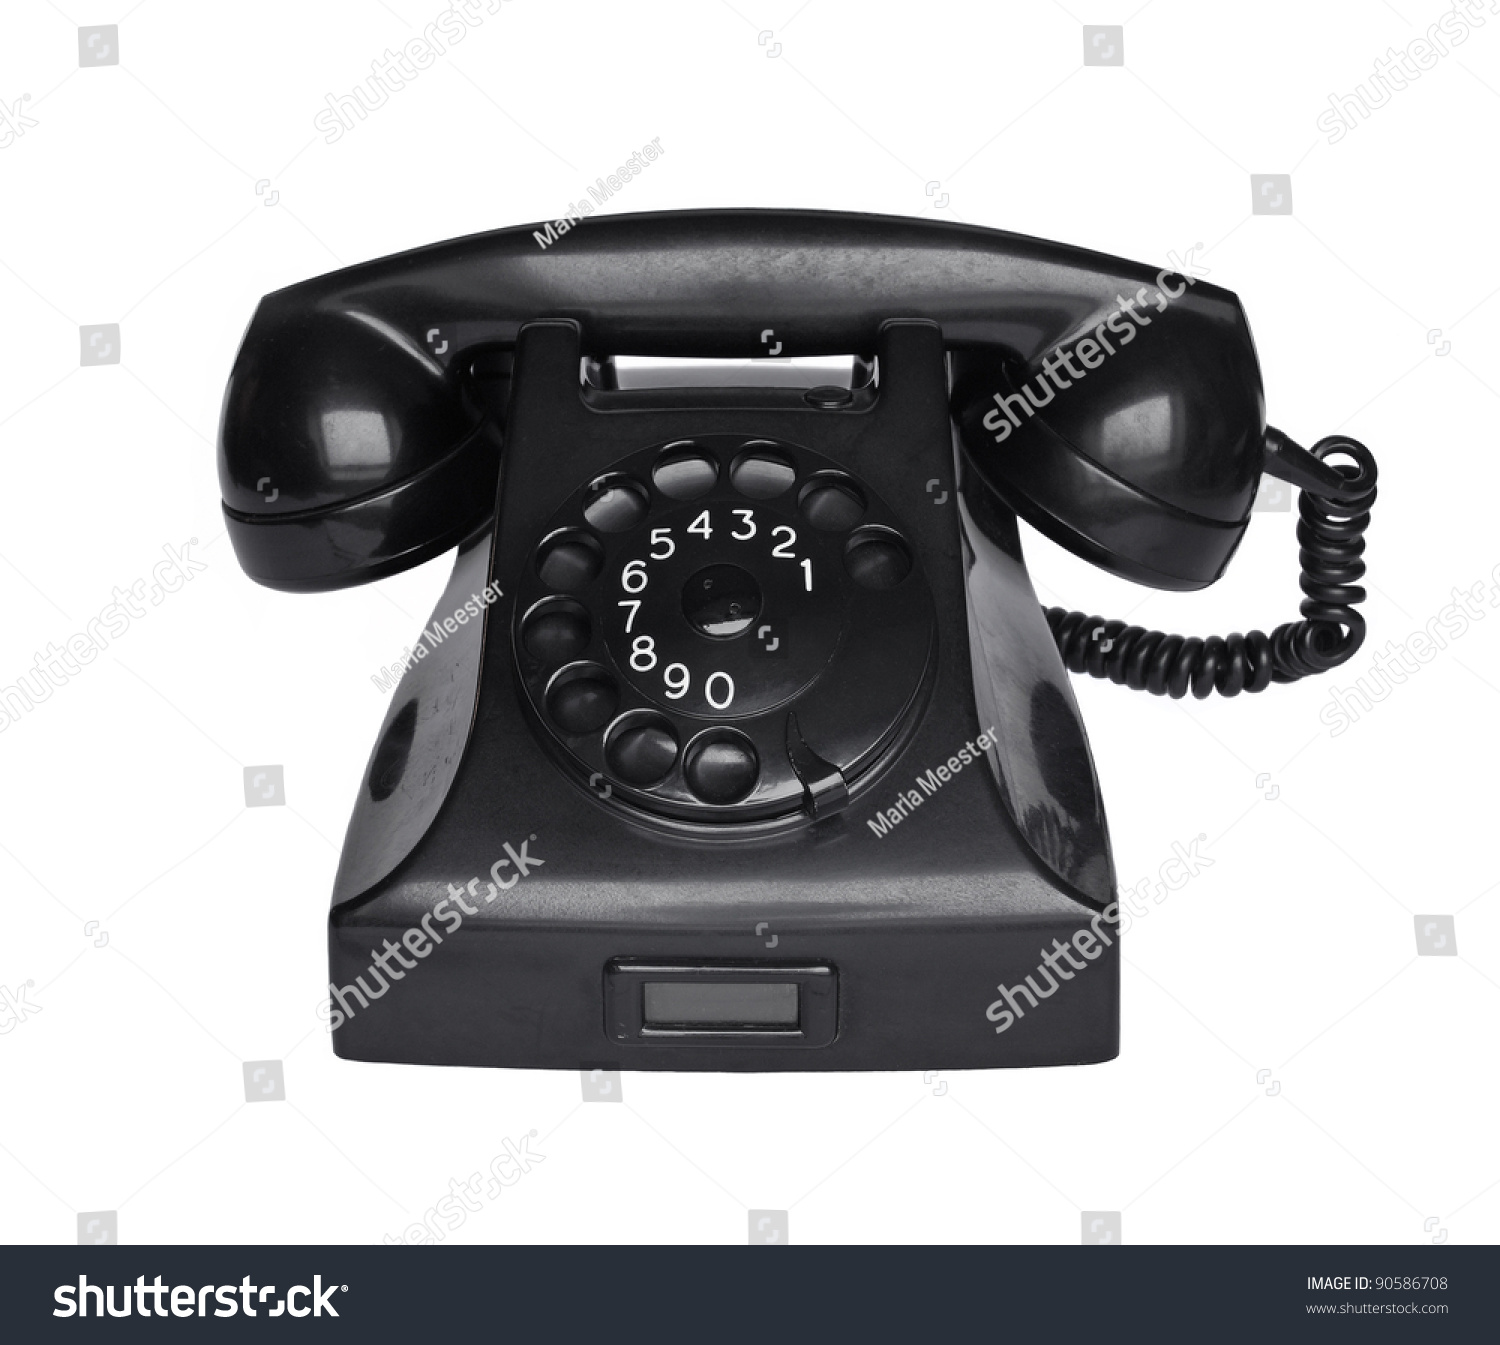 Old Analogue Black Phone Stock Photo 90586708 - Shutterstock